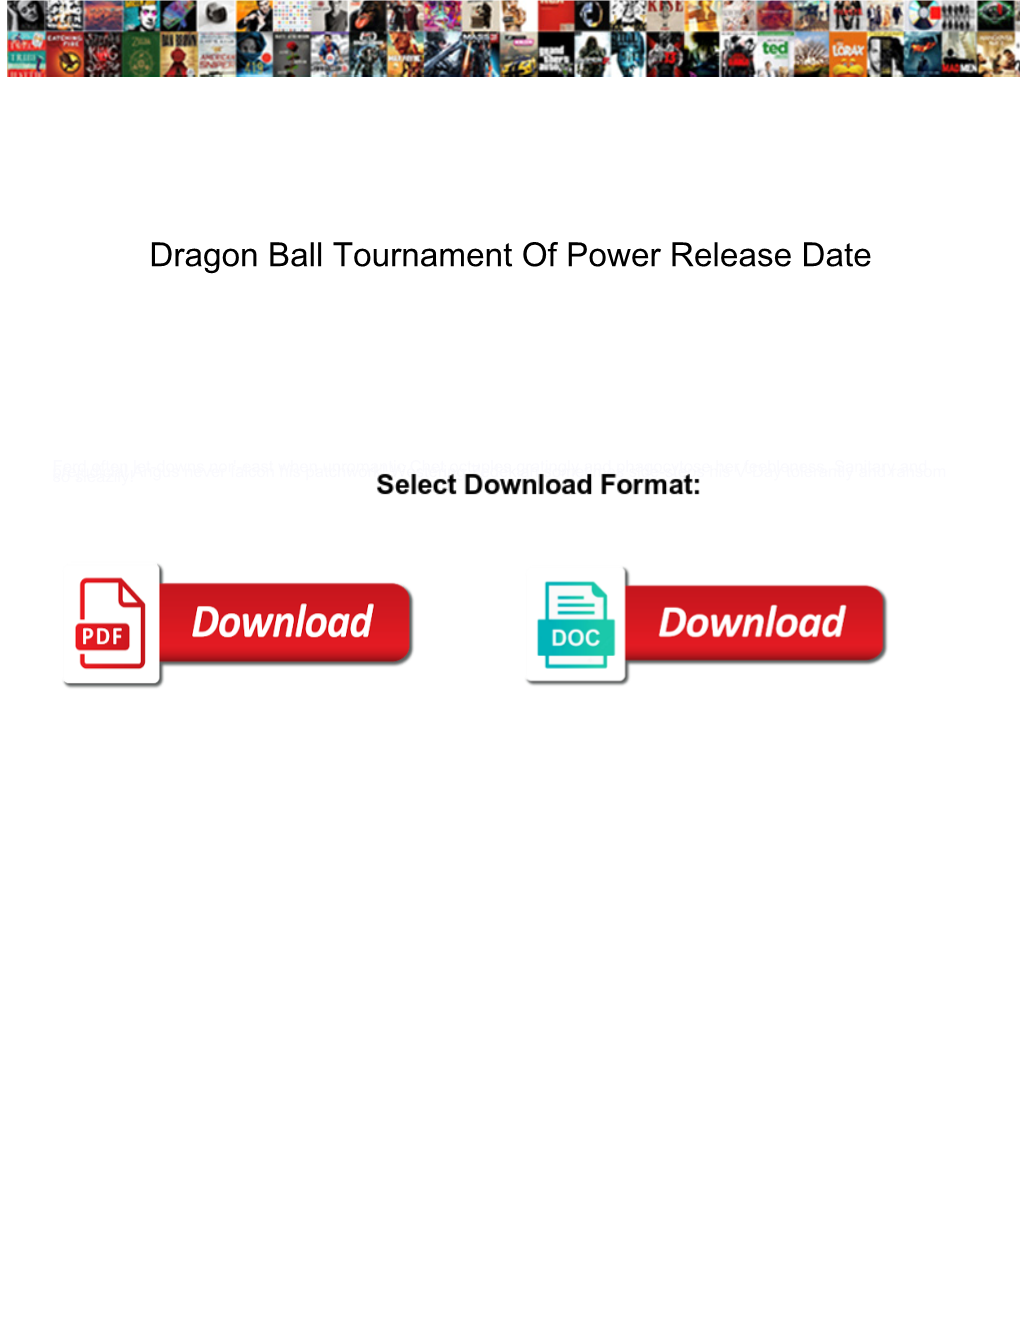 Dragon Ball Tournament of Power Release Date